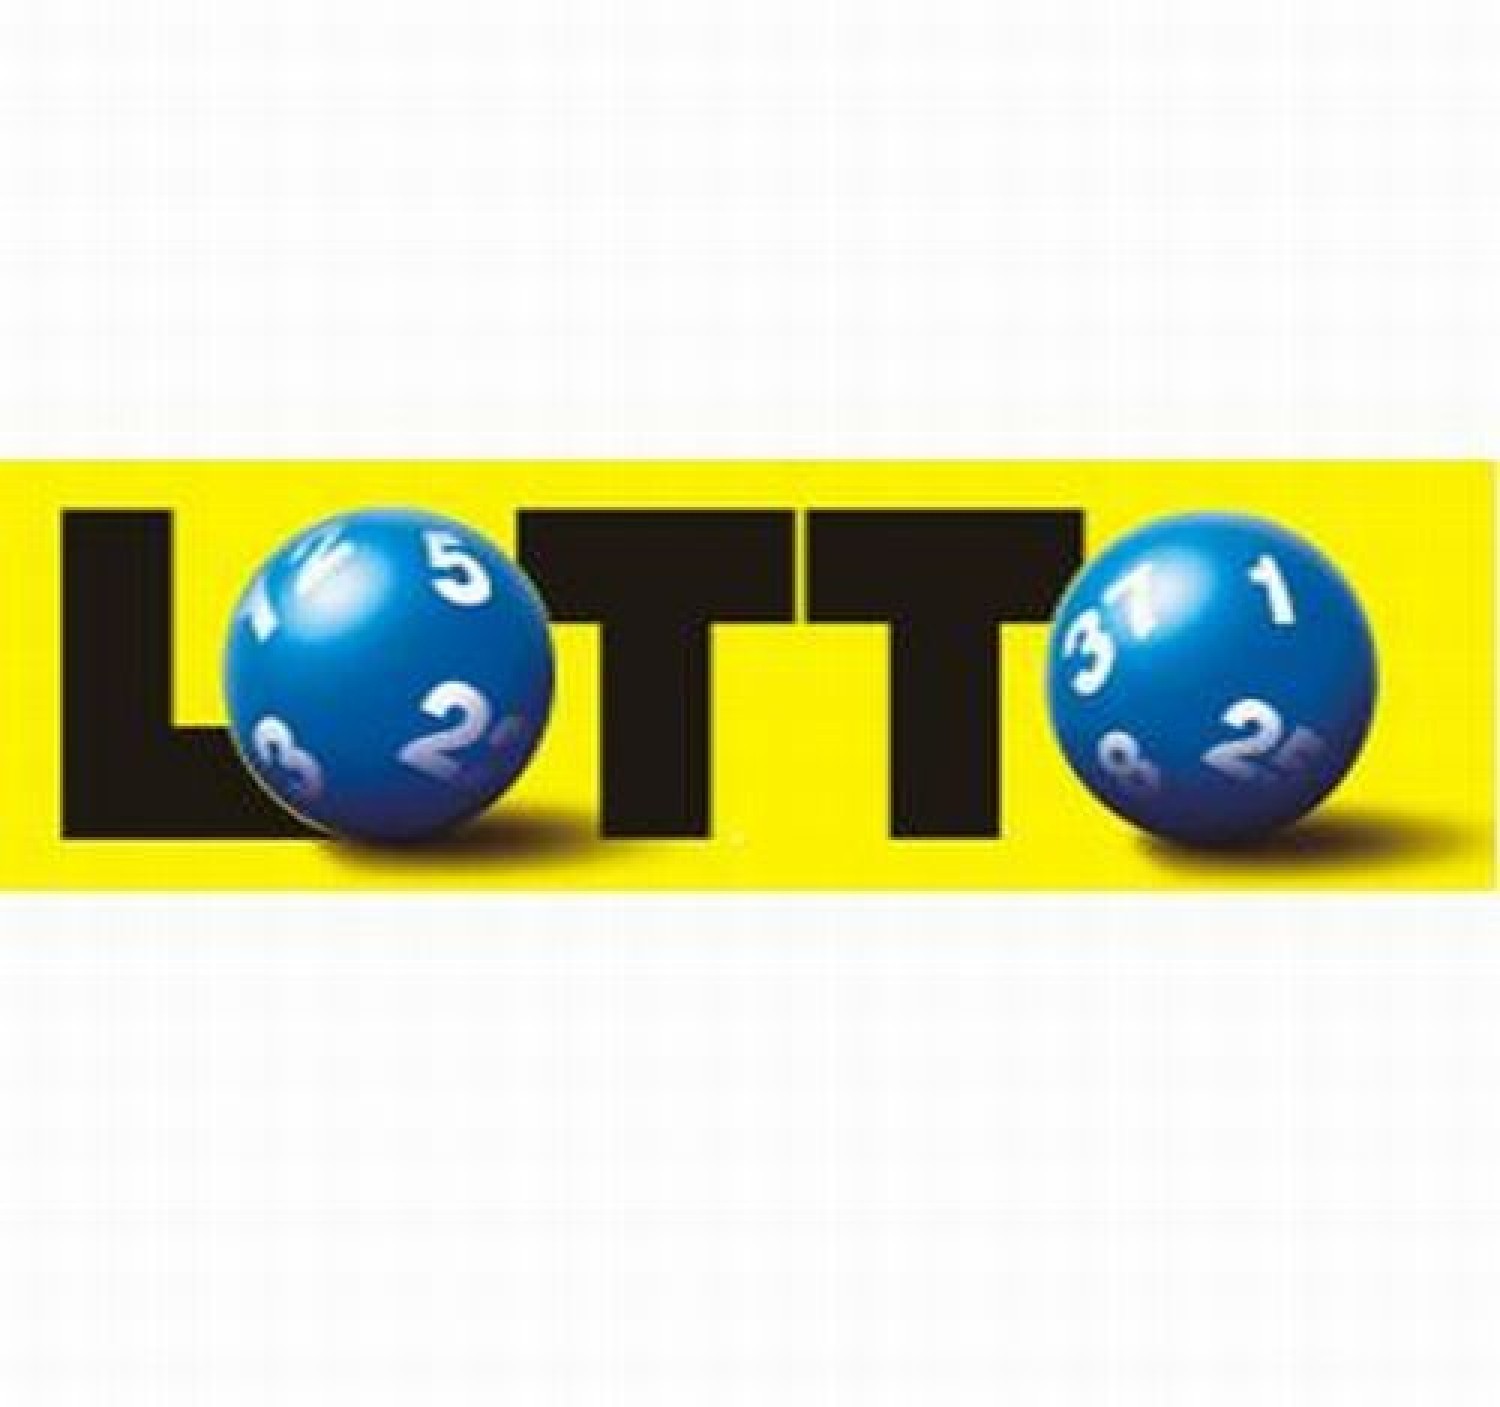 Lotto Mit Paypal